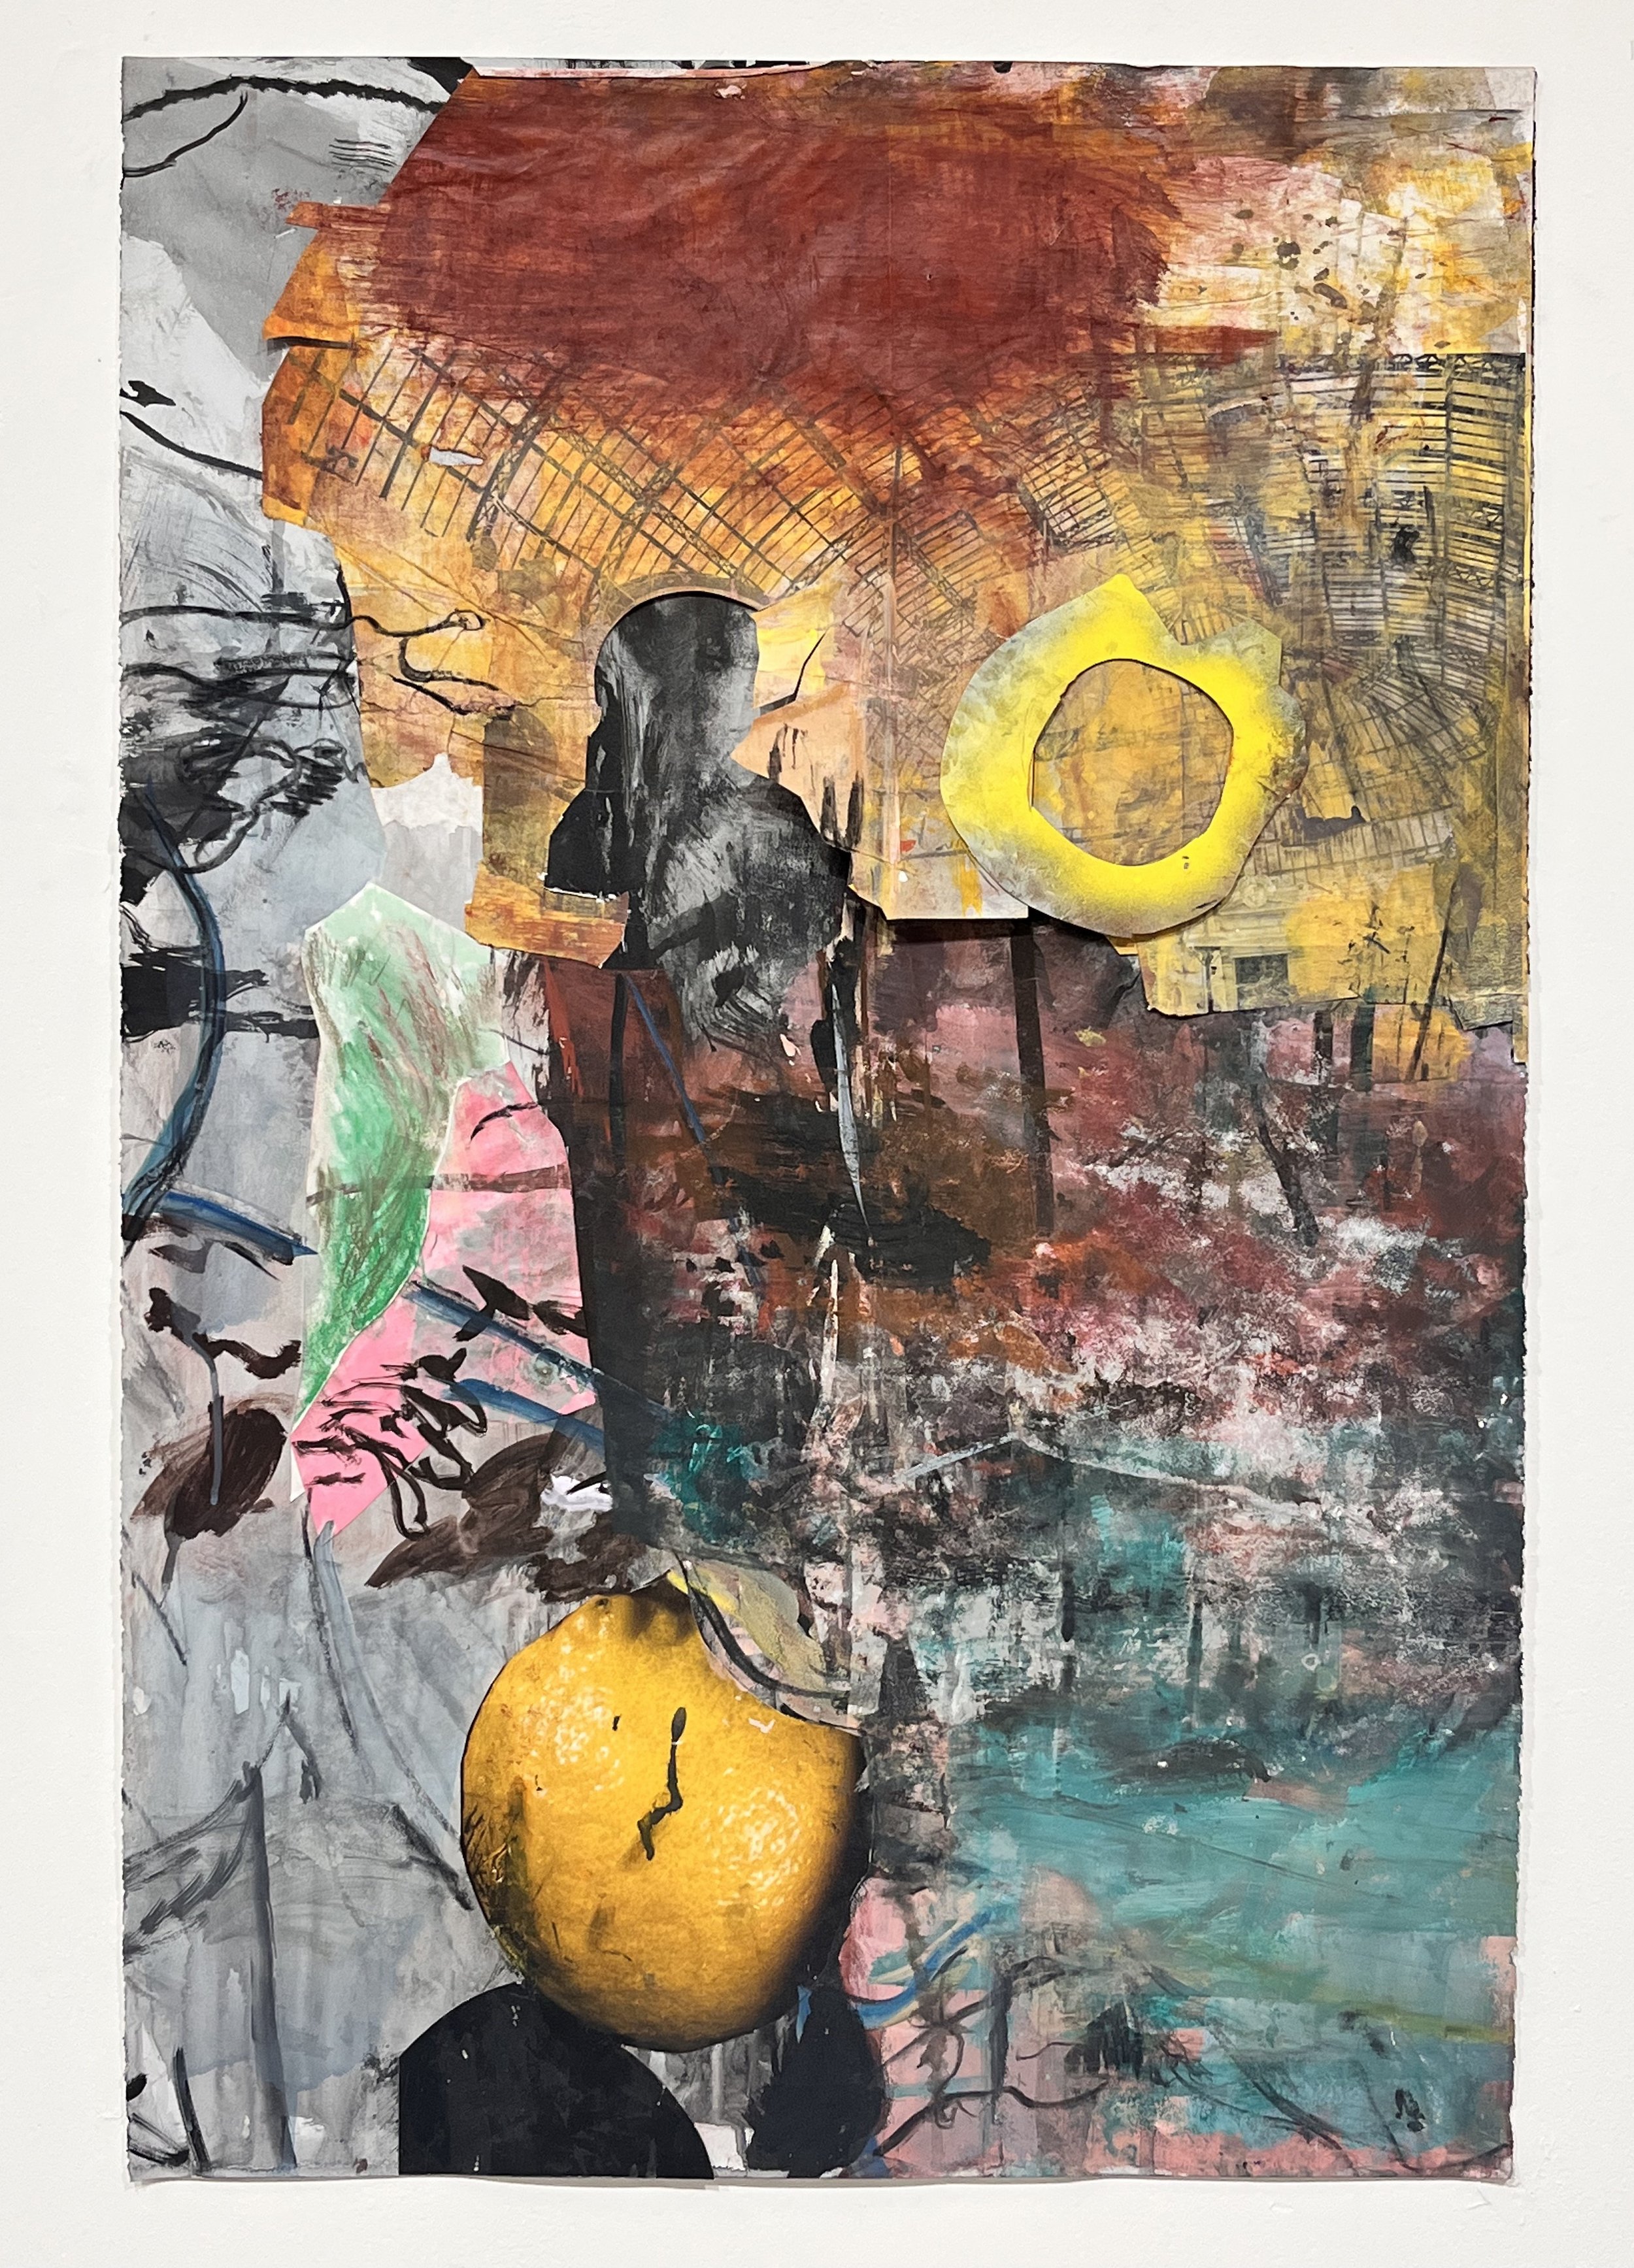 Where water pools under cast shadows II, 2023, mixed media on paper, 40 x 26 ½ inches